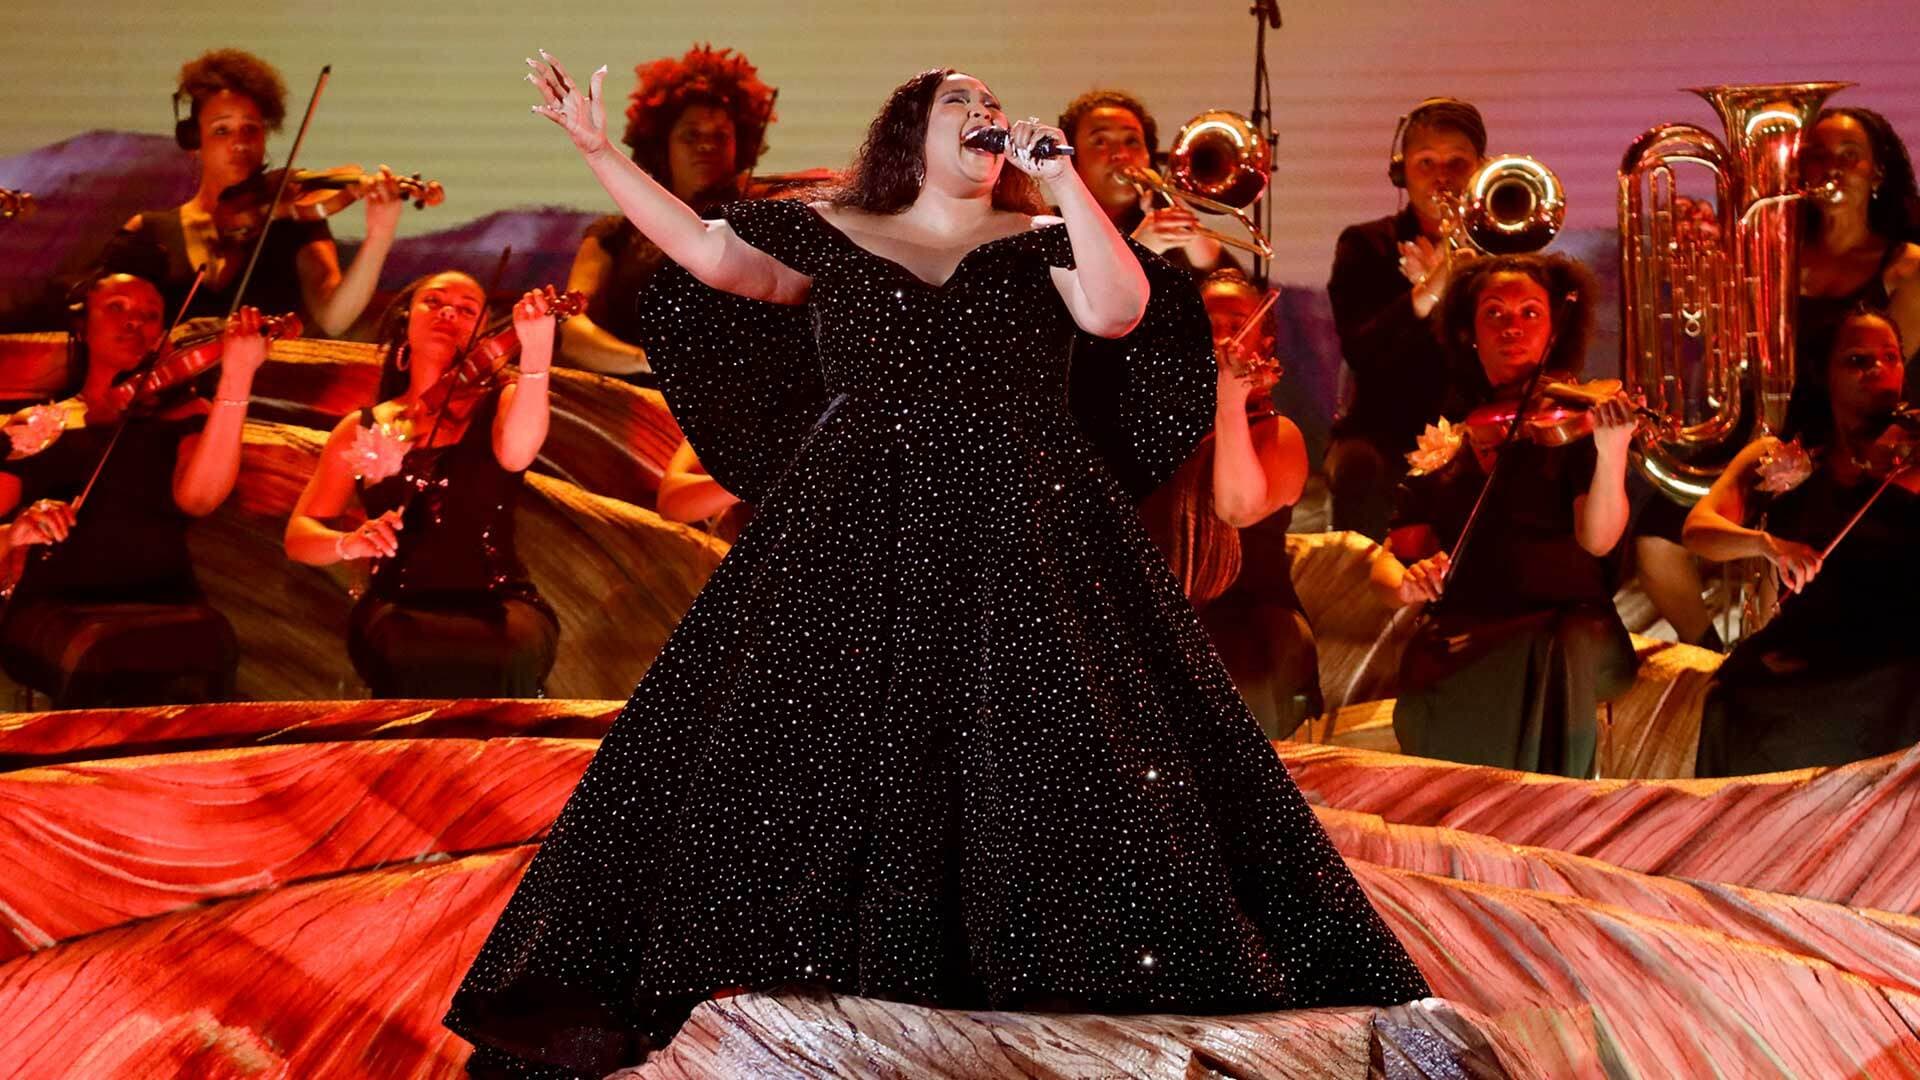 Chelsey Green (seated second from right, front row) plays her viola in support of Lizzo, whose performance opened the Jan. 26 Grammy Awards broadcast.